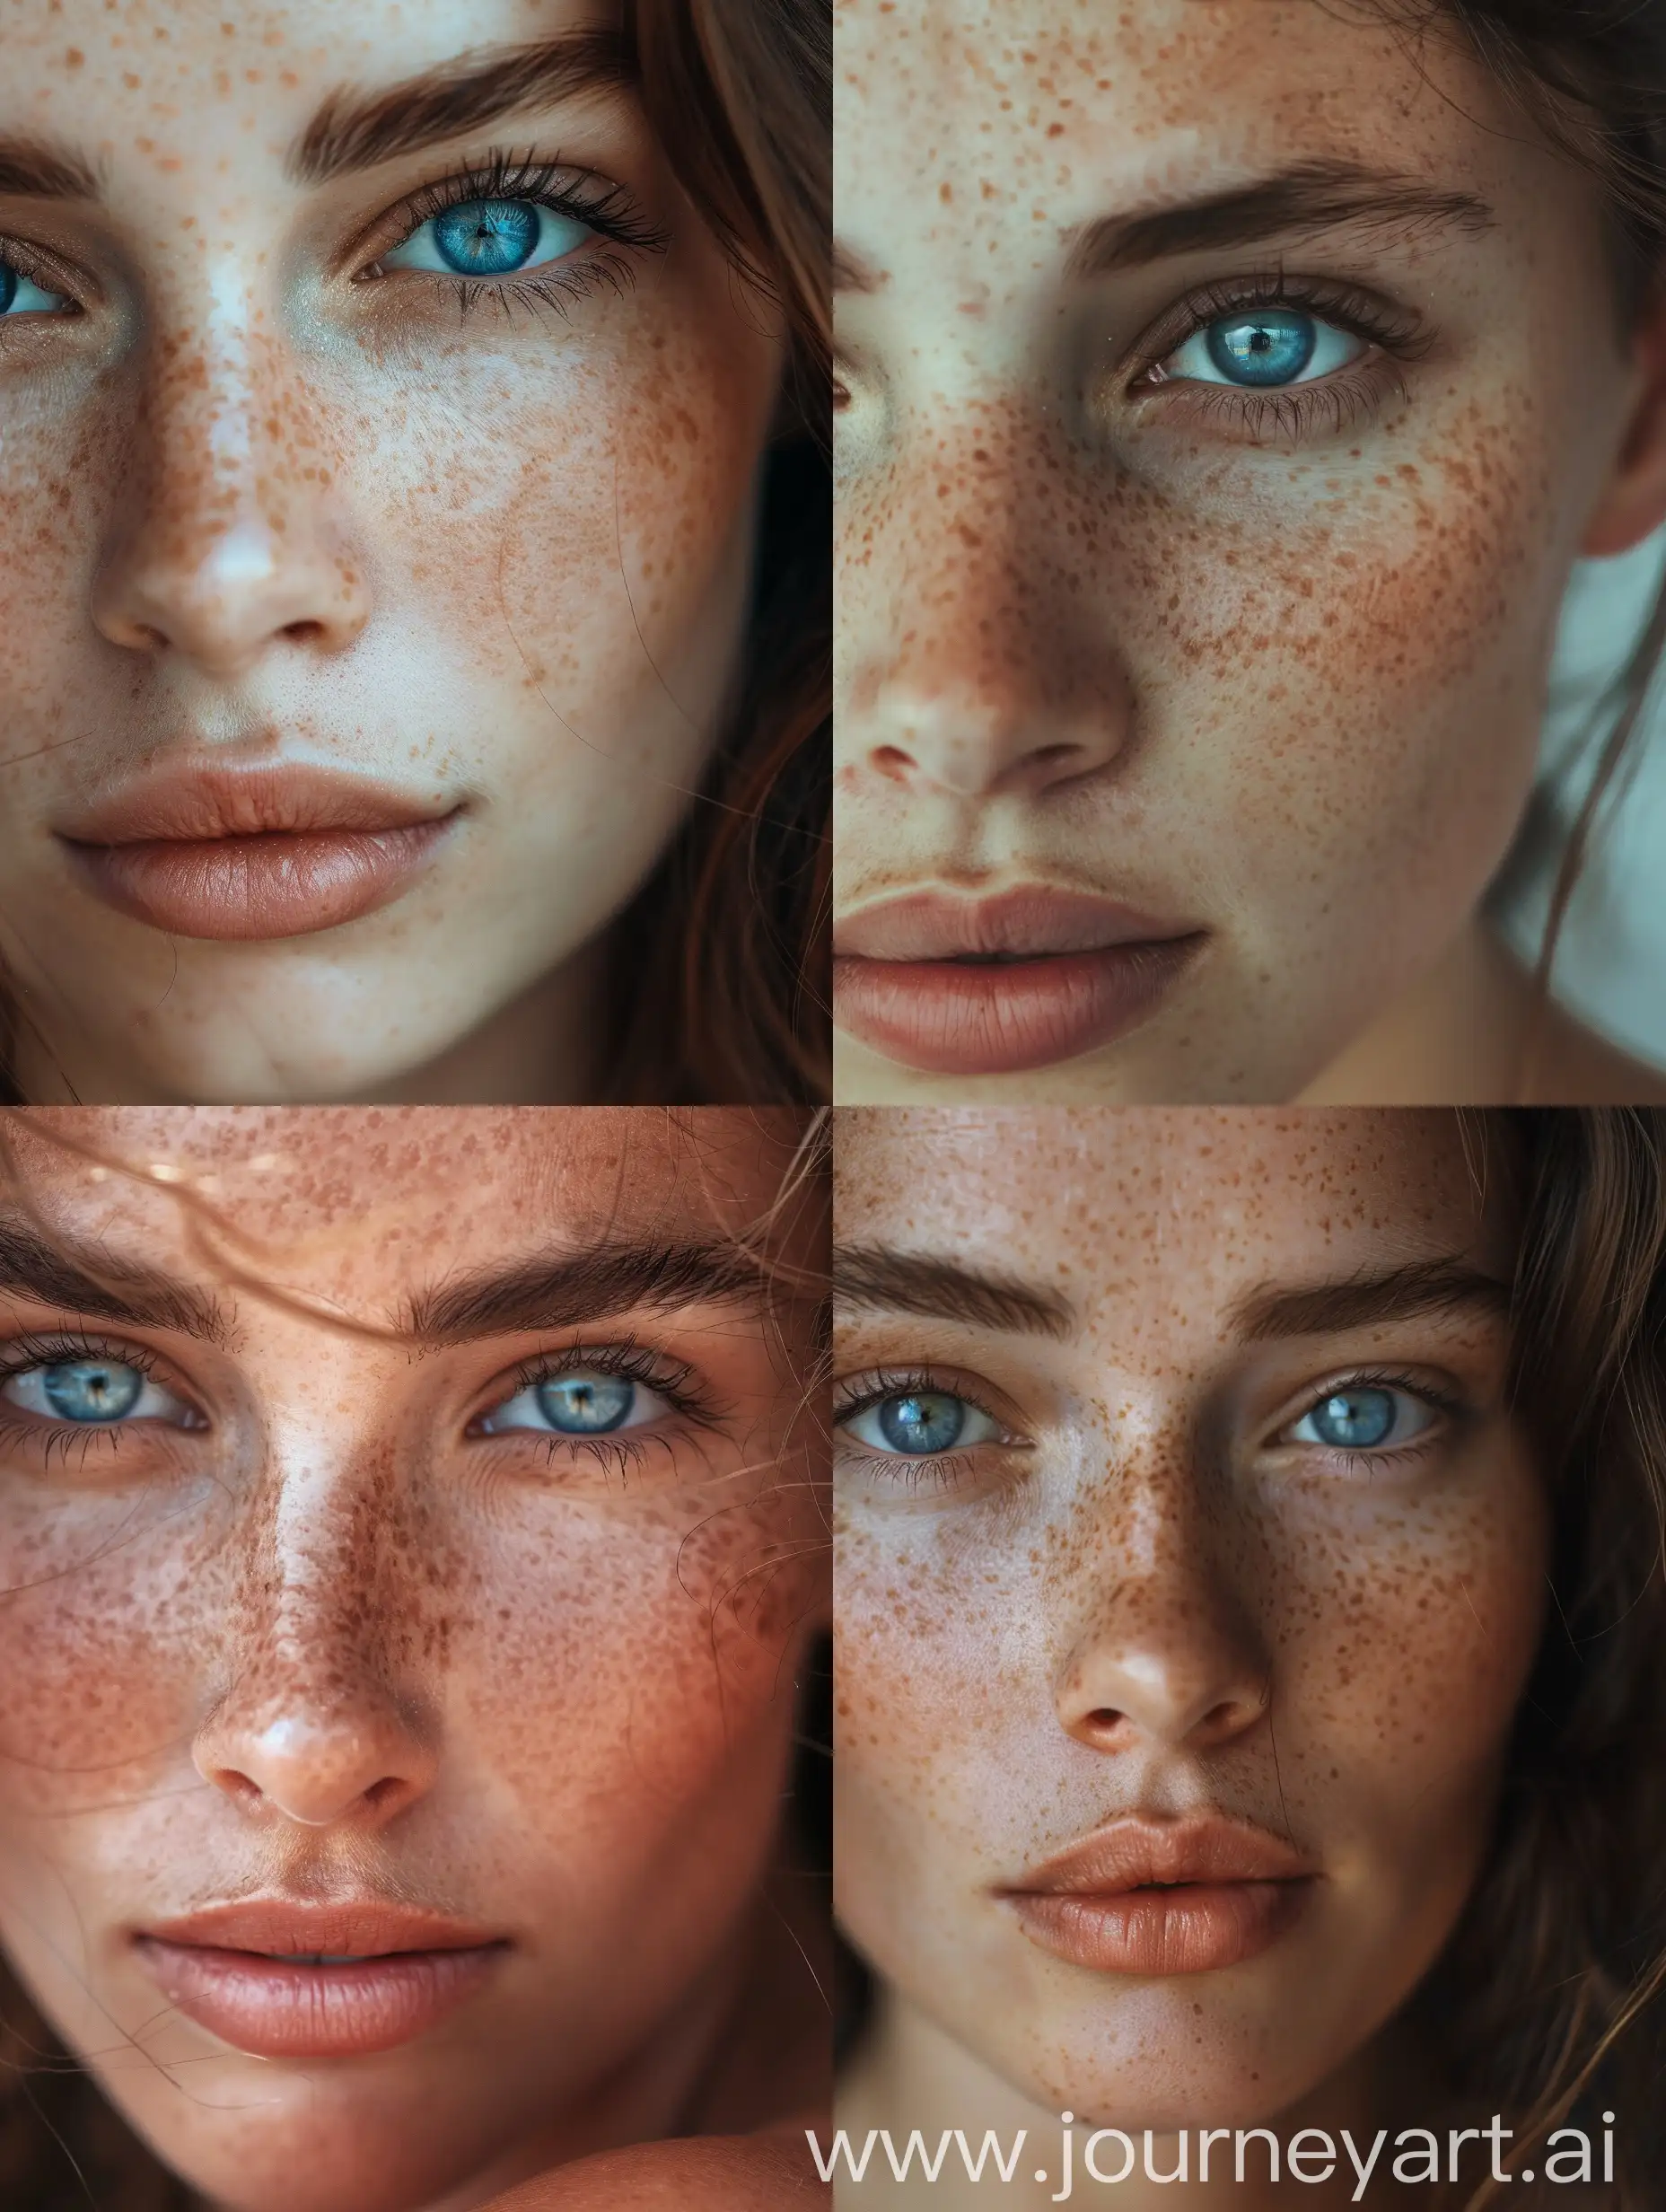 CloseUp-Portrait-of-a-Beautiful-Woman-with-Freckles-and-Blue-Eyes